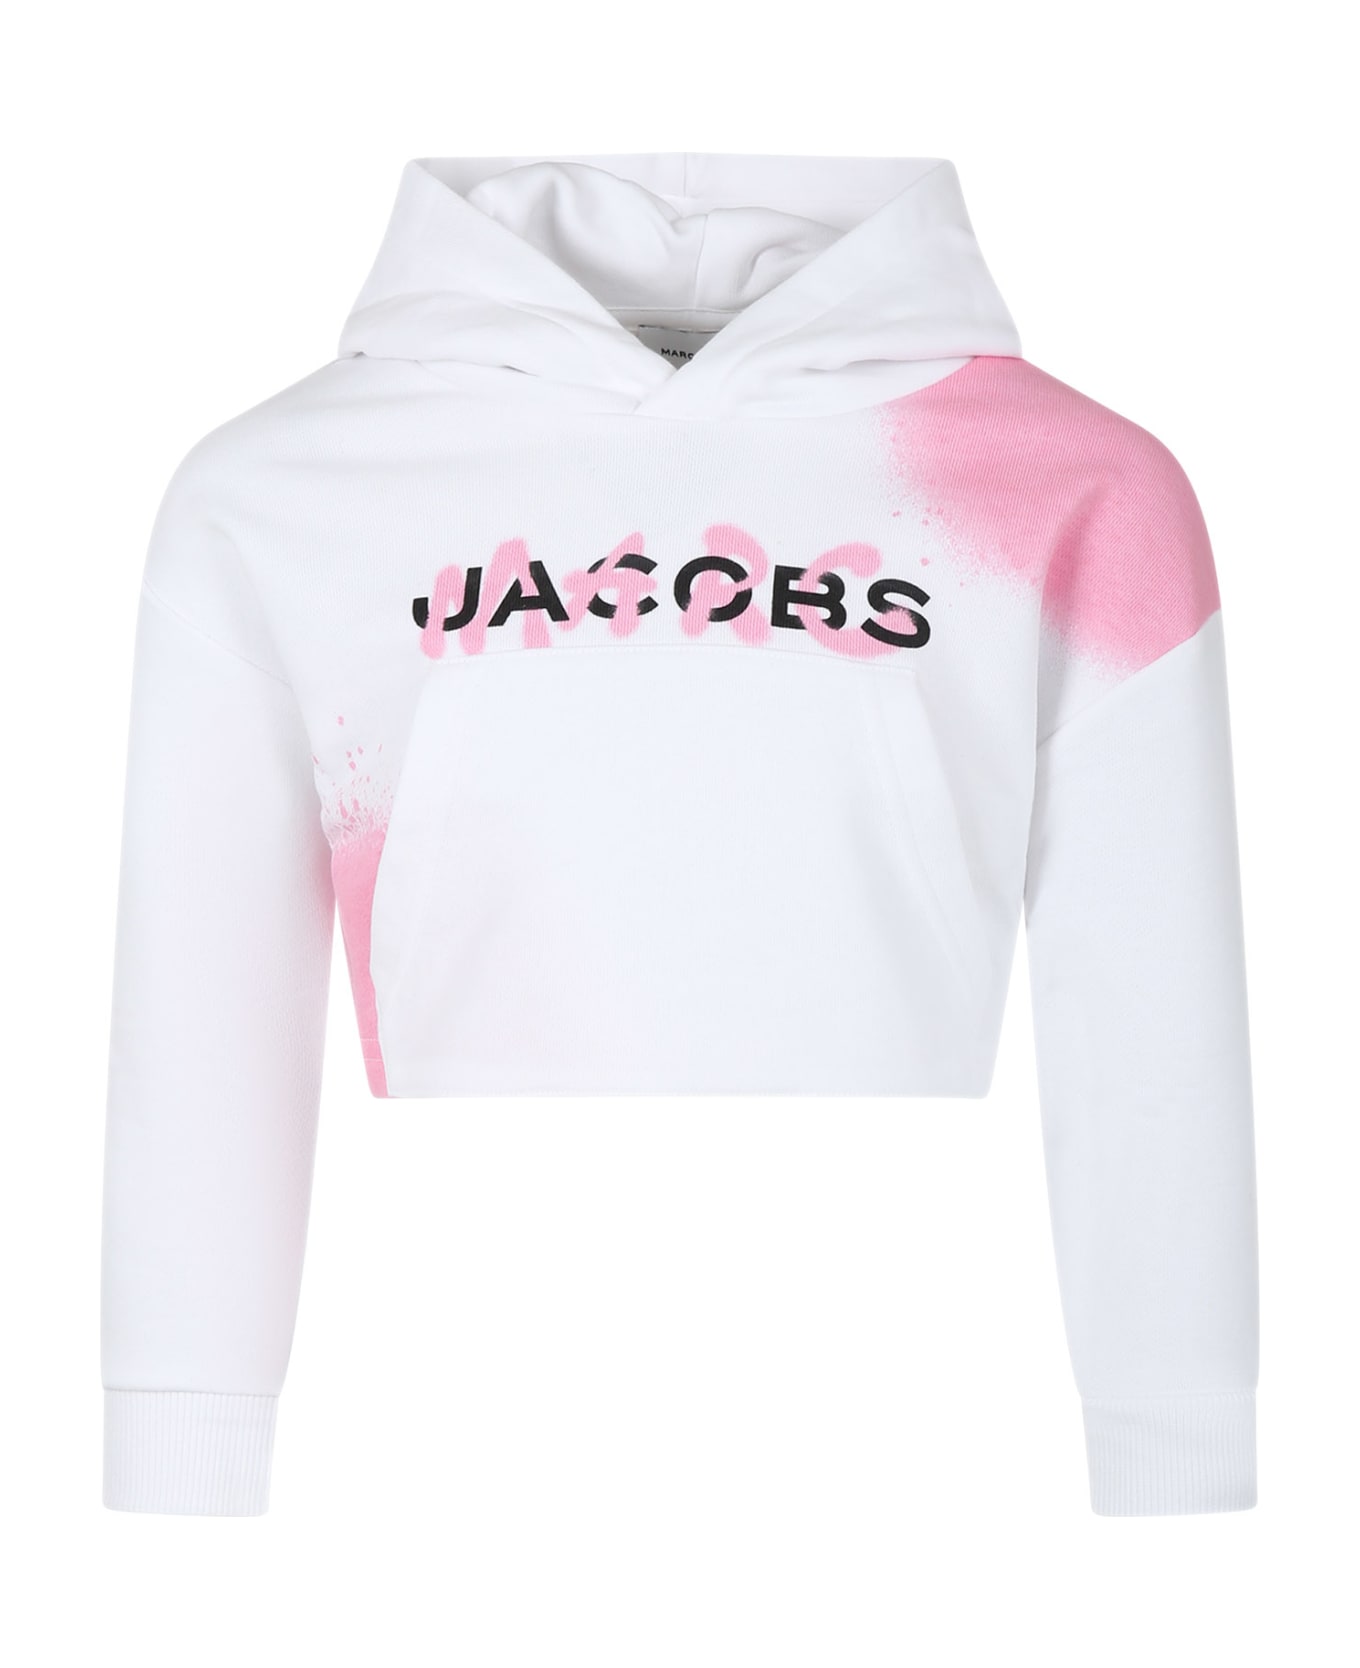 Marc Jacobs White Sweatshirt For Girl With Logo - White